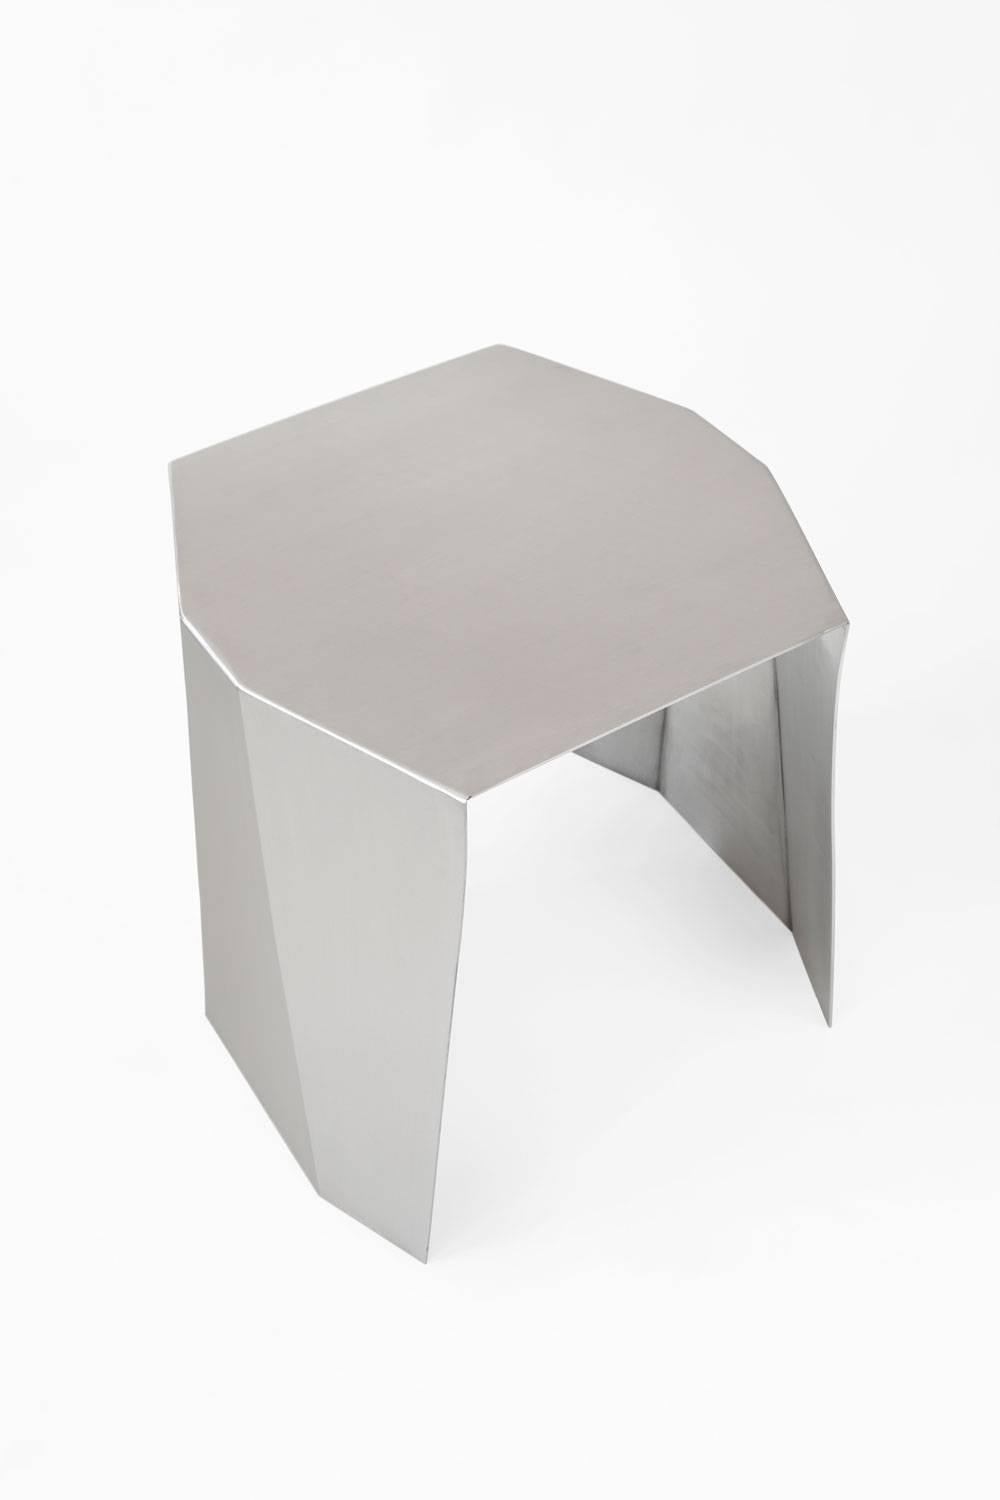 Spanish Adolfo Abejon Contemporary Stainless Steel Katy Limited Edition Sculpture Table